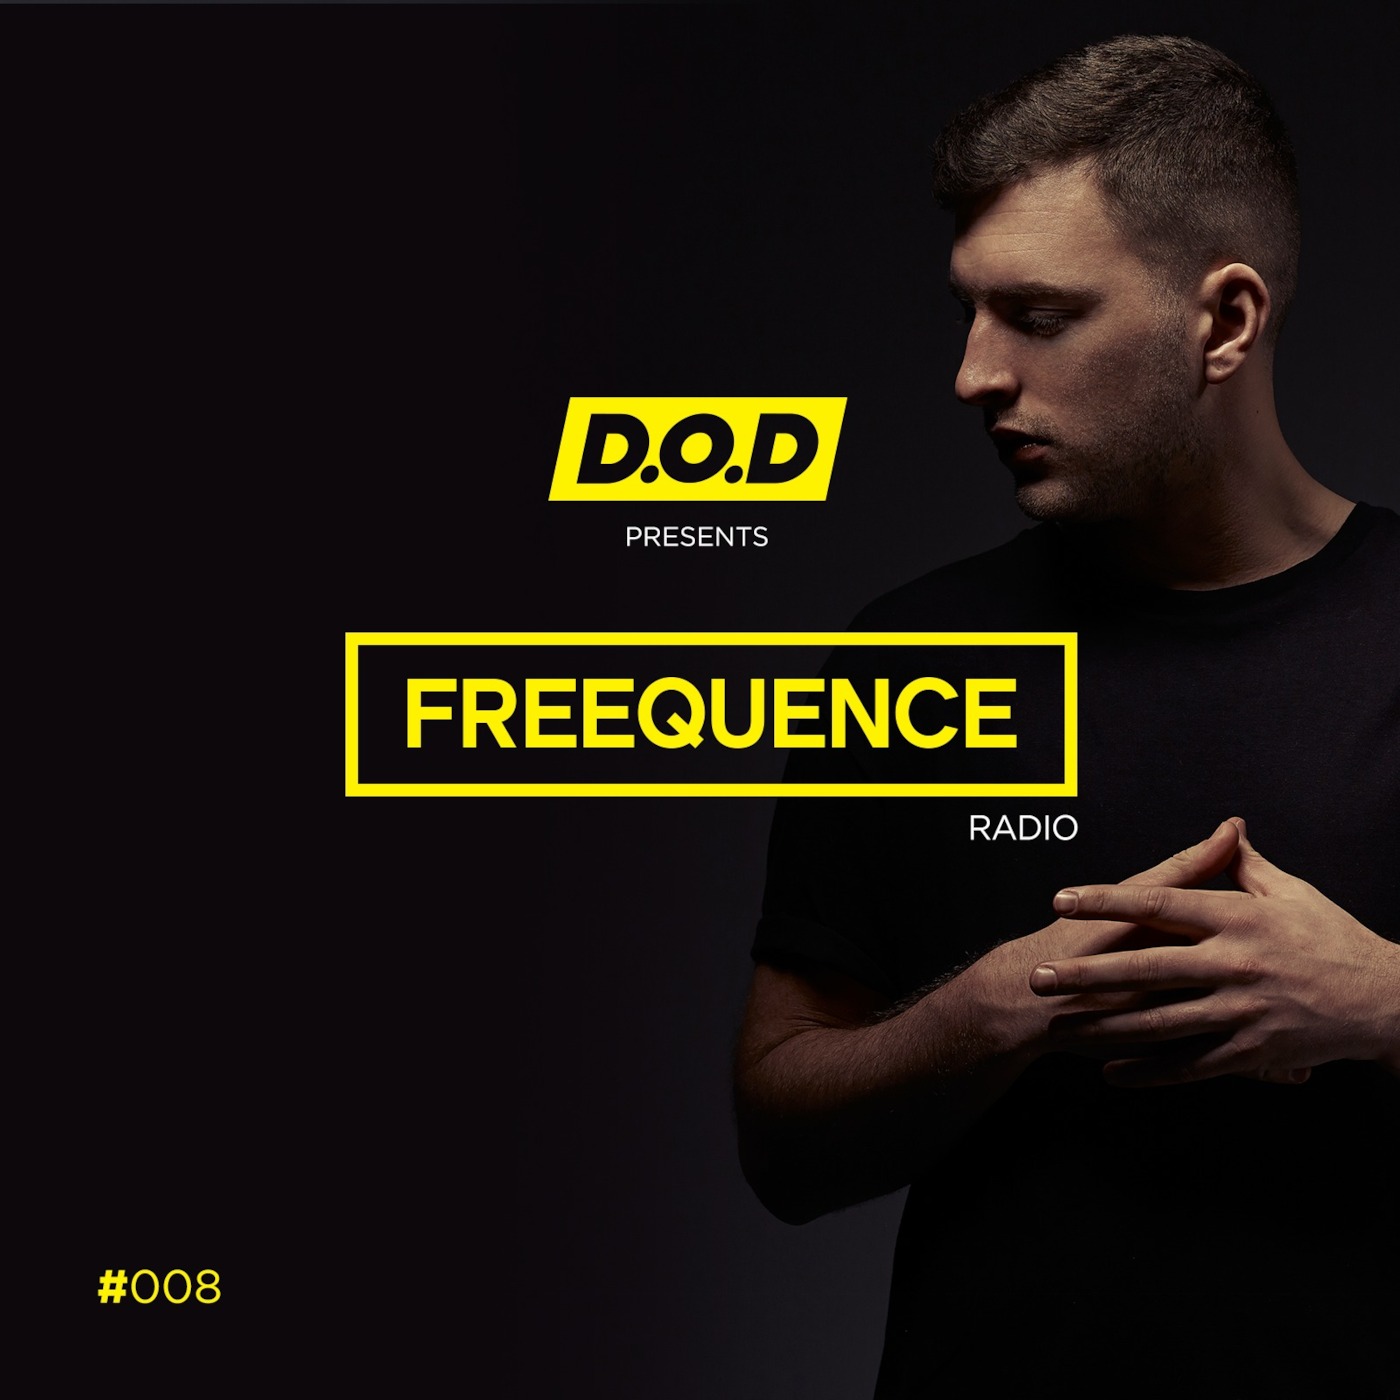 #FREEQUENCE Radio with D.O.D #008